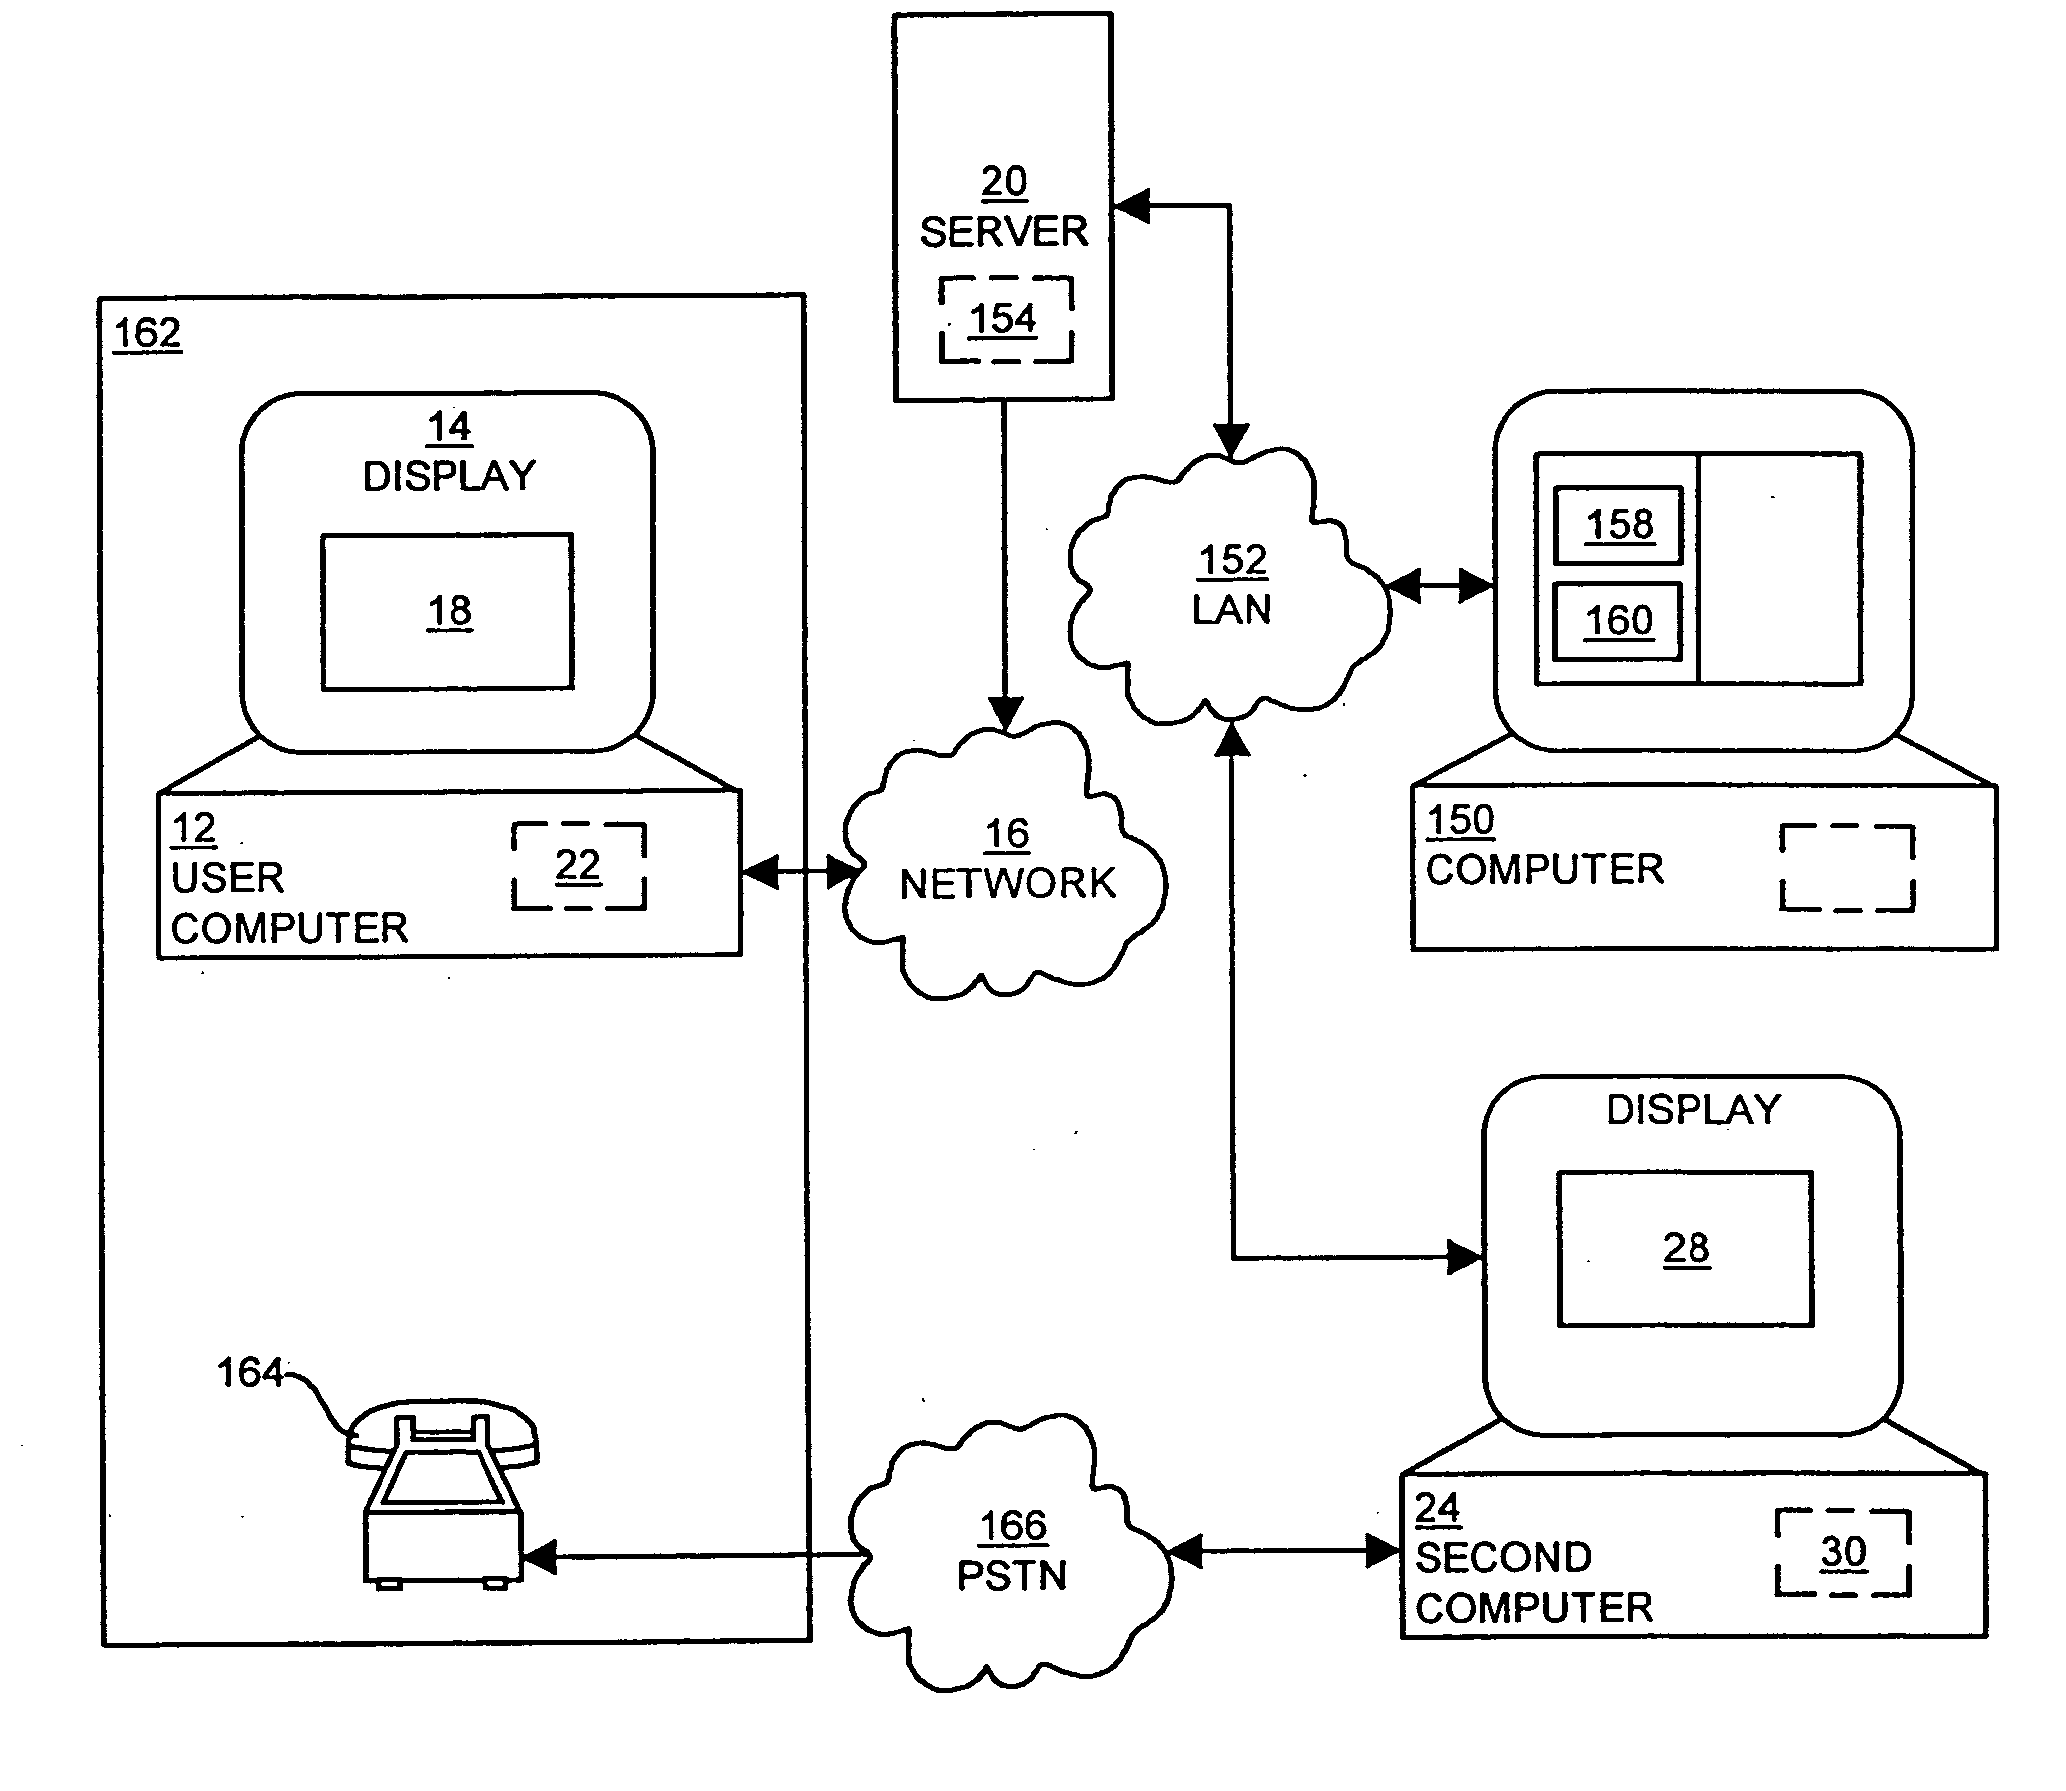 Method and apparatus for coordinating internet multi-media content with telephone and audio communications